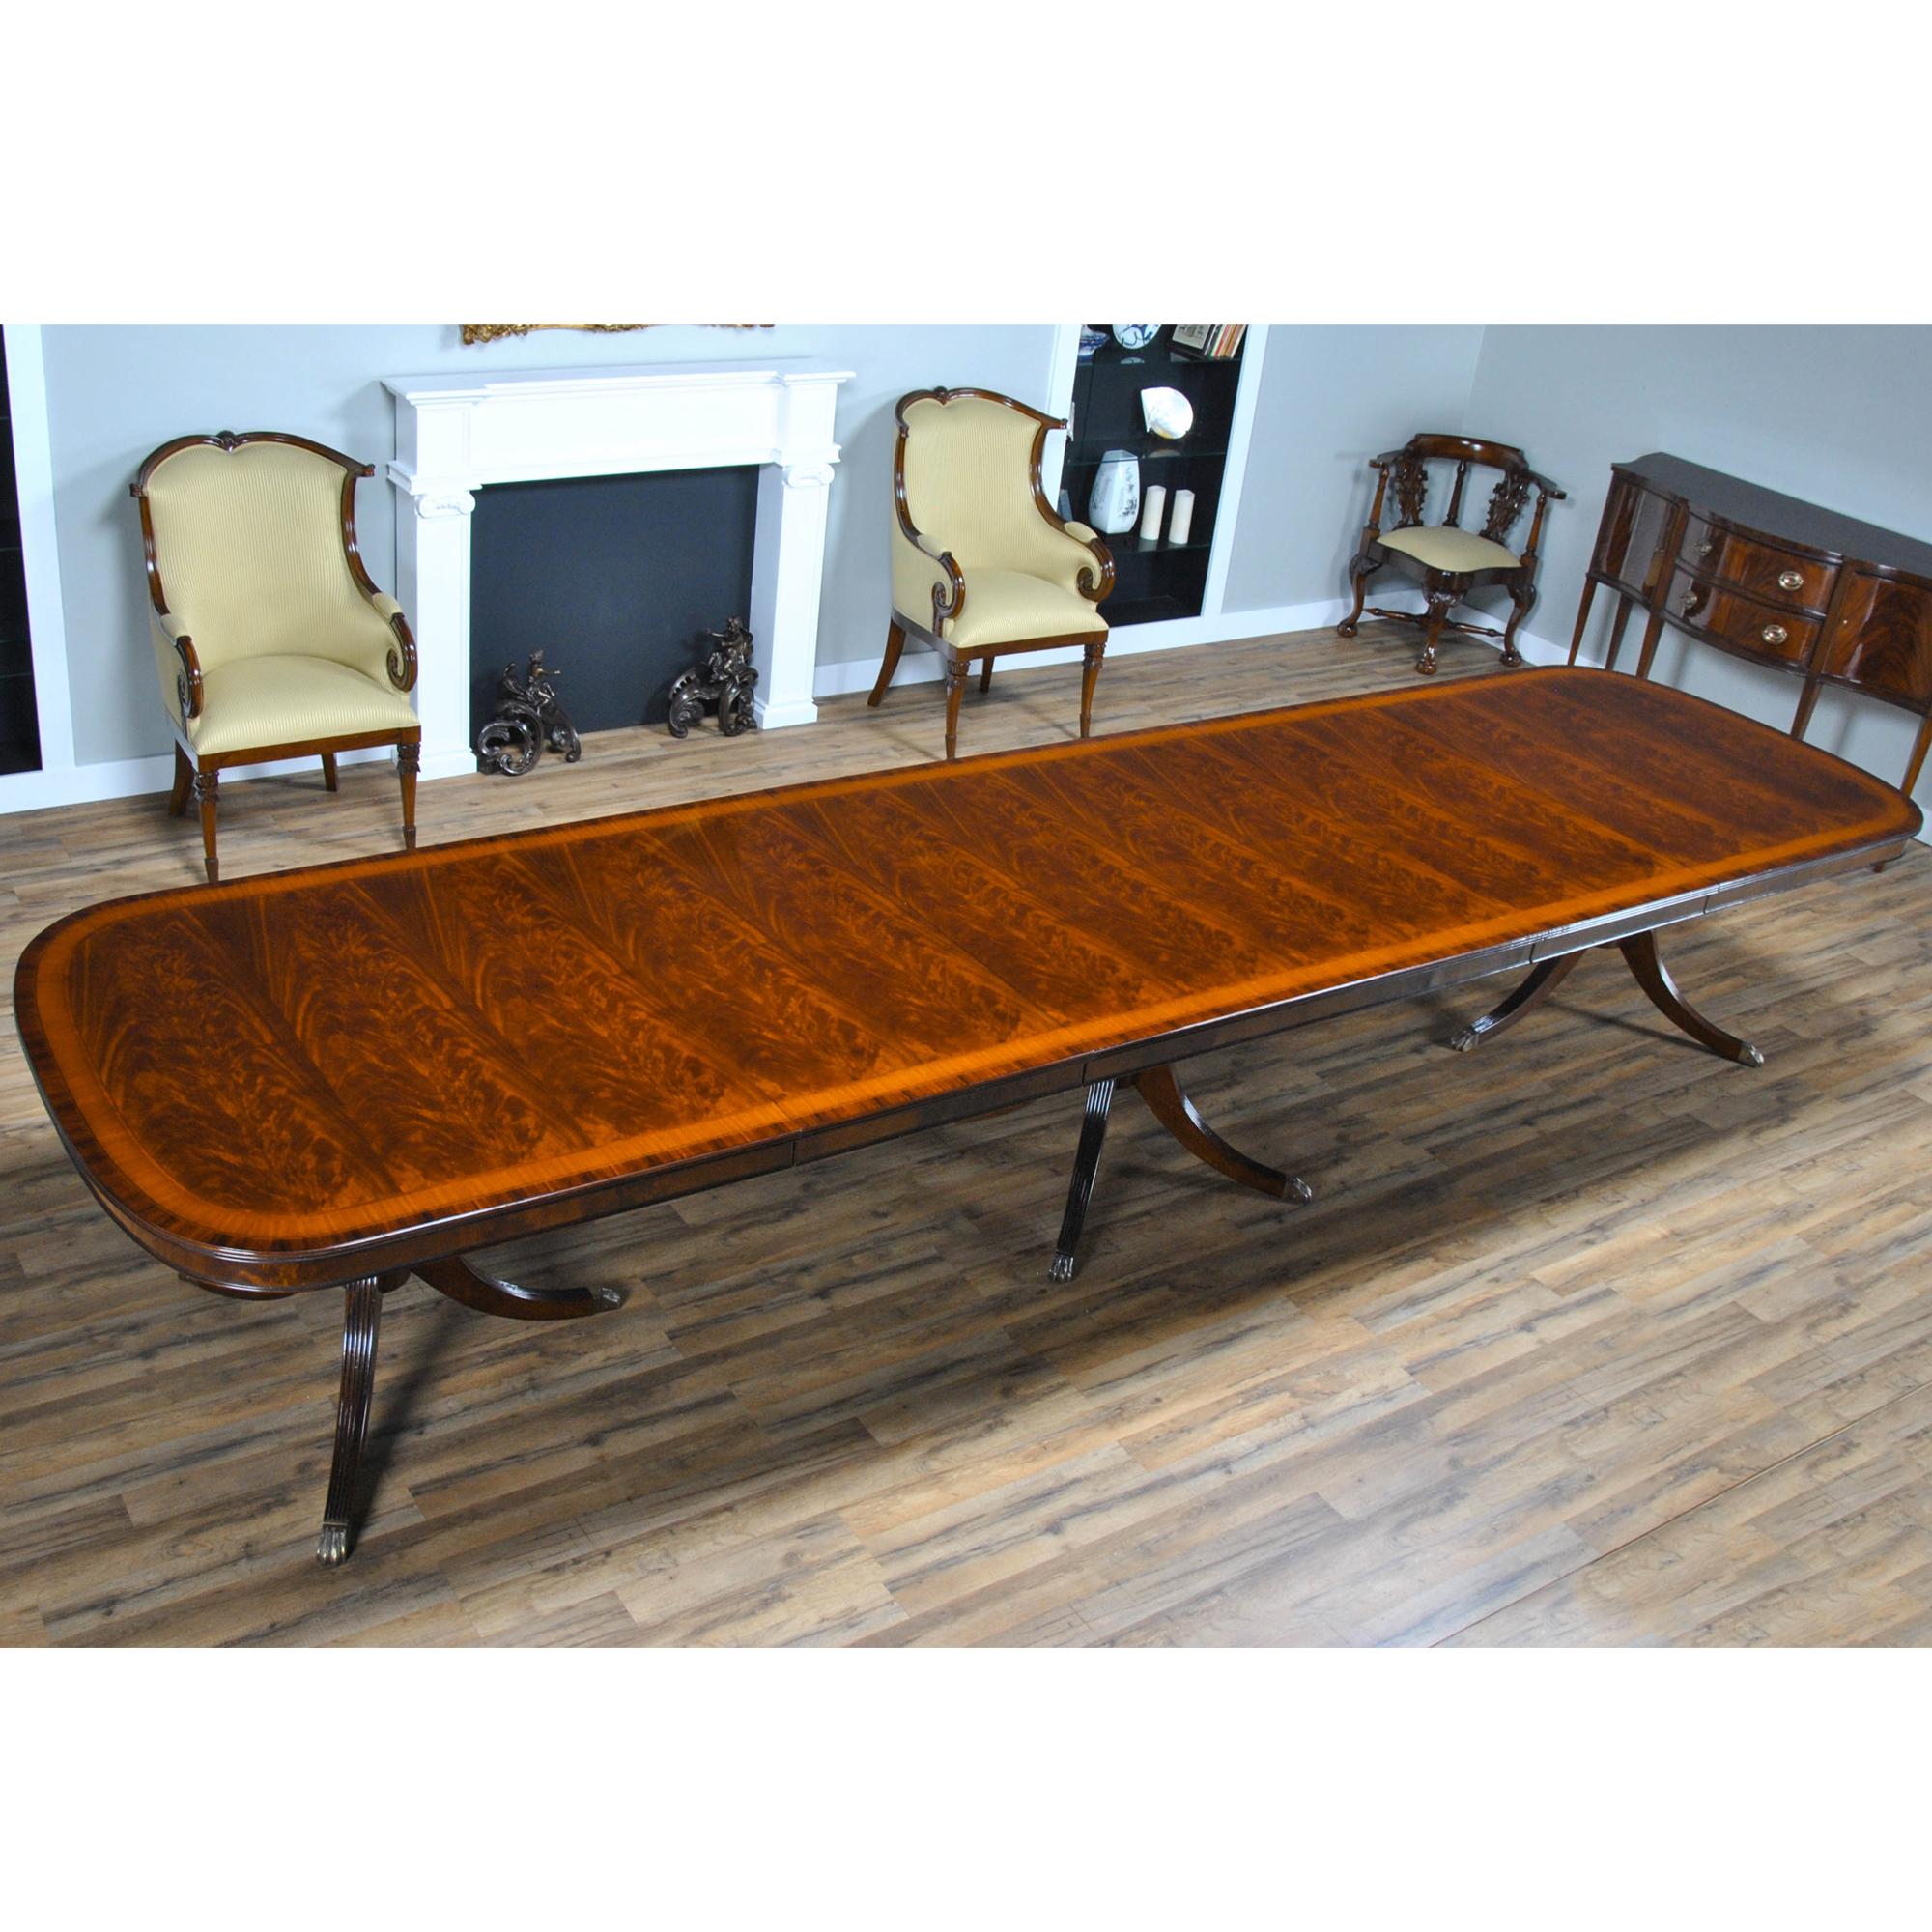 This version of a Three Pedestal 15 Foot Mahogany Dining Table has a lot of great features that combine to make it a show stopper. A reeded solid mahogany edge surrounds the table top and then flows into numerous bandings consisting of rosewood,